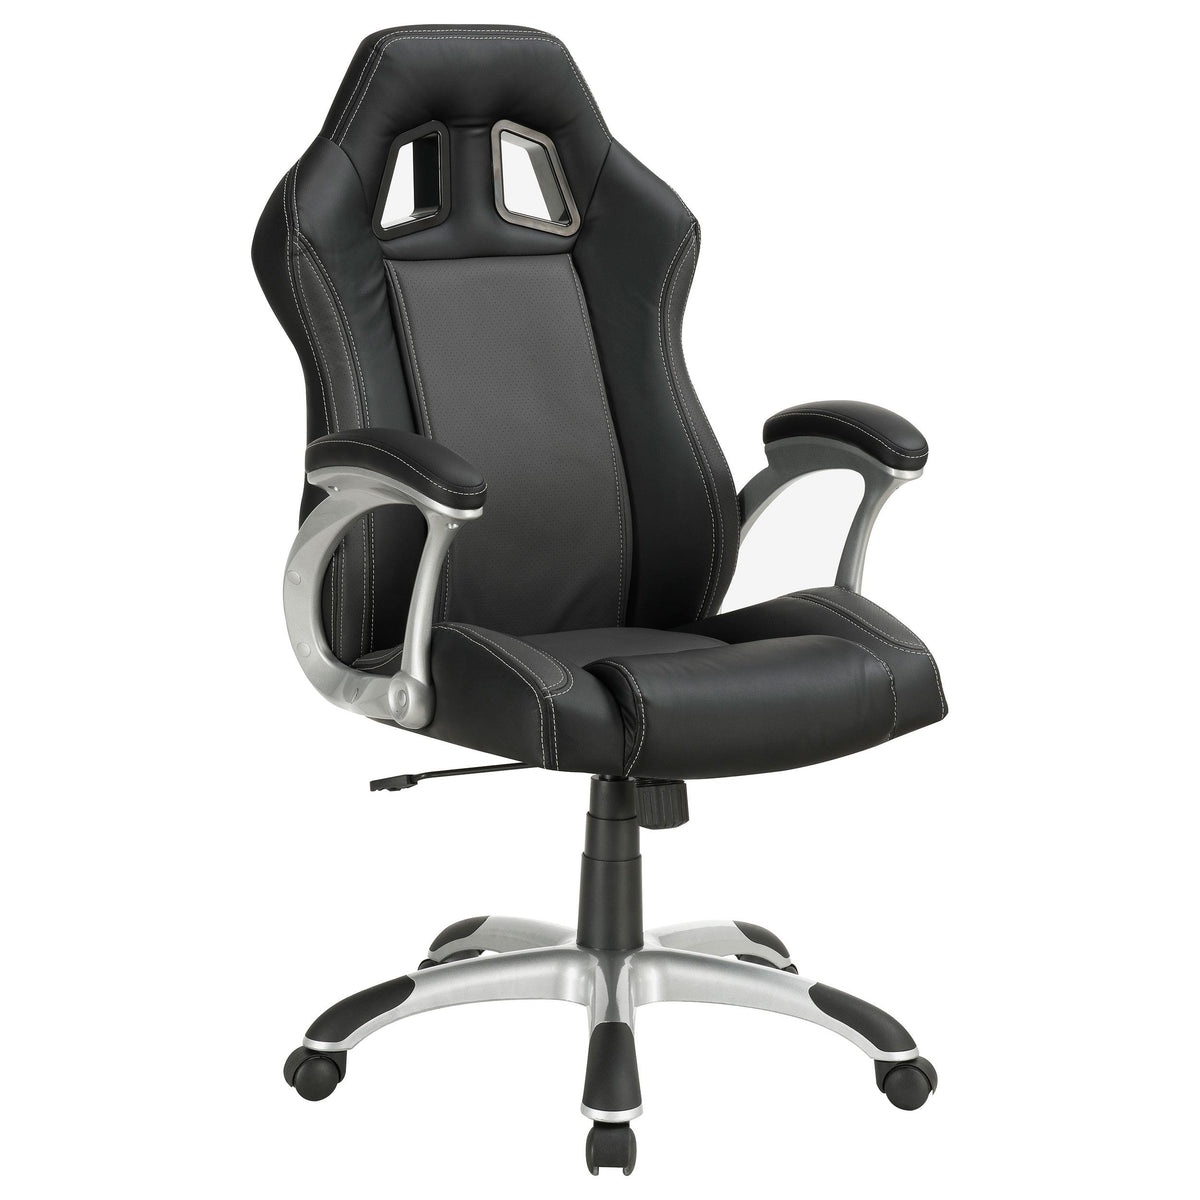 Roger Adjustable Height Office Chair Black and Grey  Las Vegas Furniture Stores